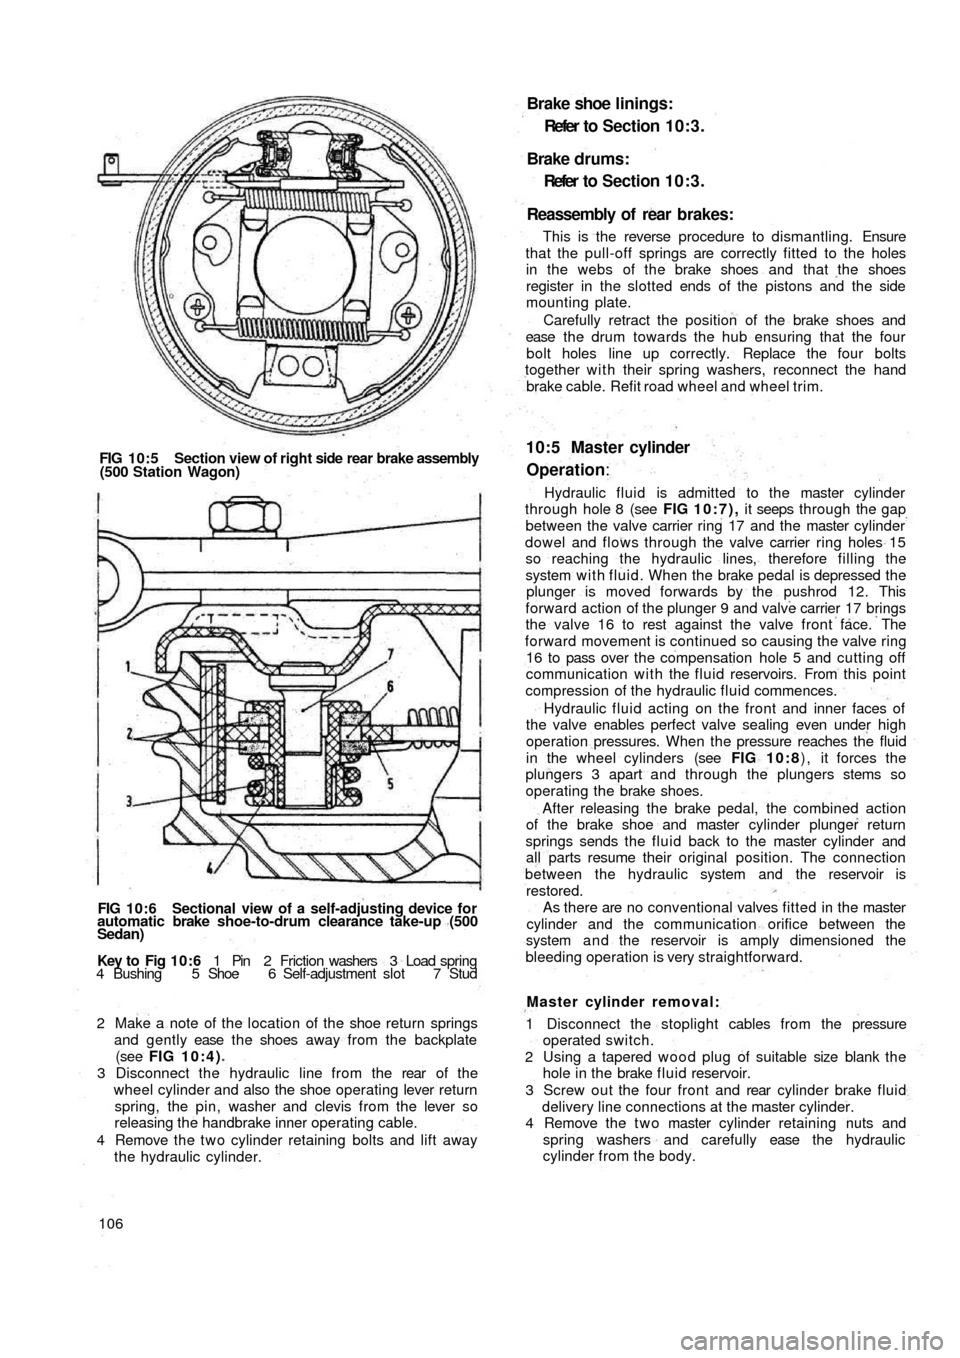 FIAT 500 1968 1.G Workshop Manual FIG 10:5 Section view of right side rear brake assembly
(500 Station Wagon)
FIG 10:6 Sectional view of a self-adjusting device for
automatic brake shoe-to-drum clearance take-up (500
Sedan)
Key  to   